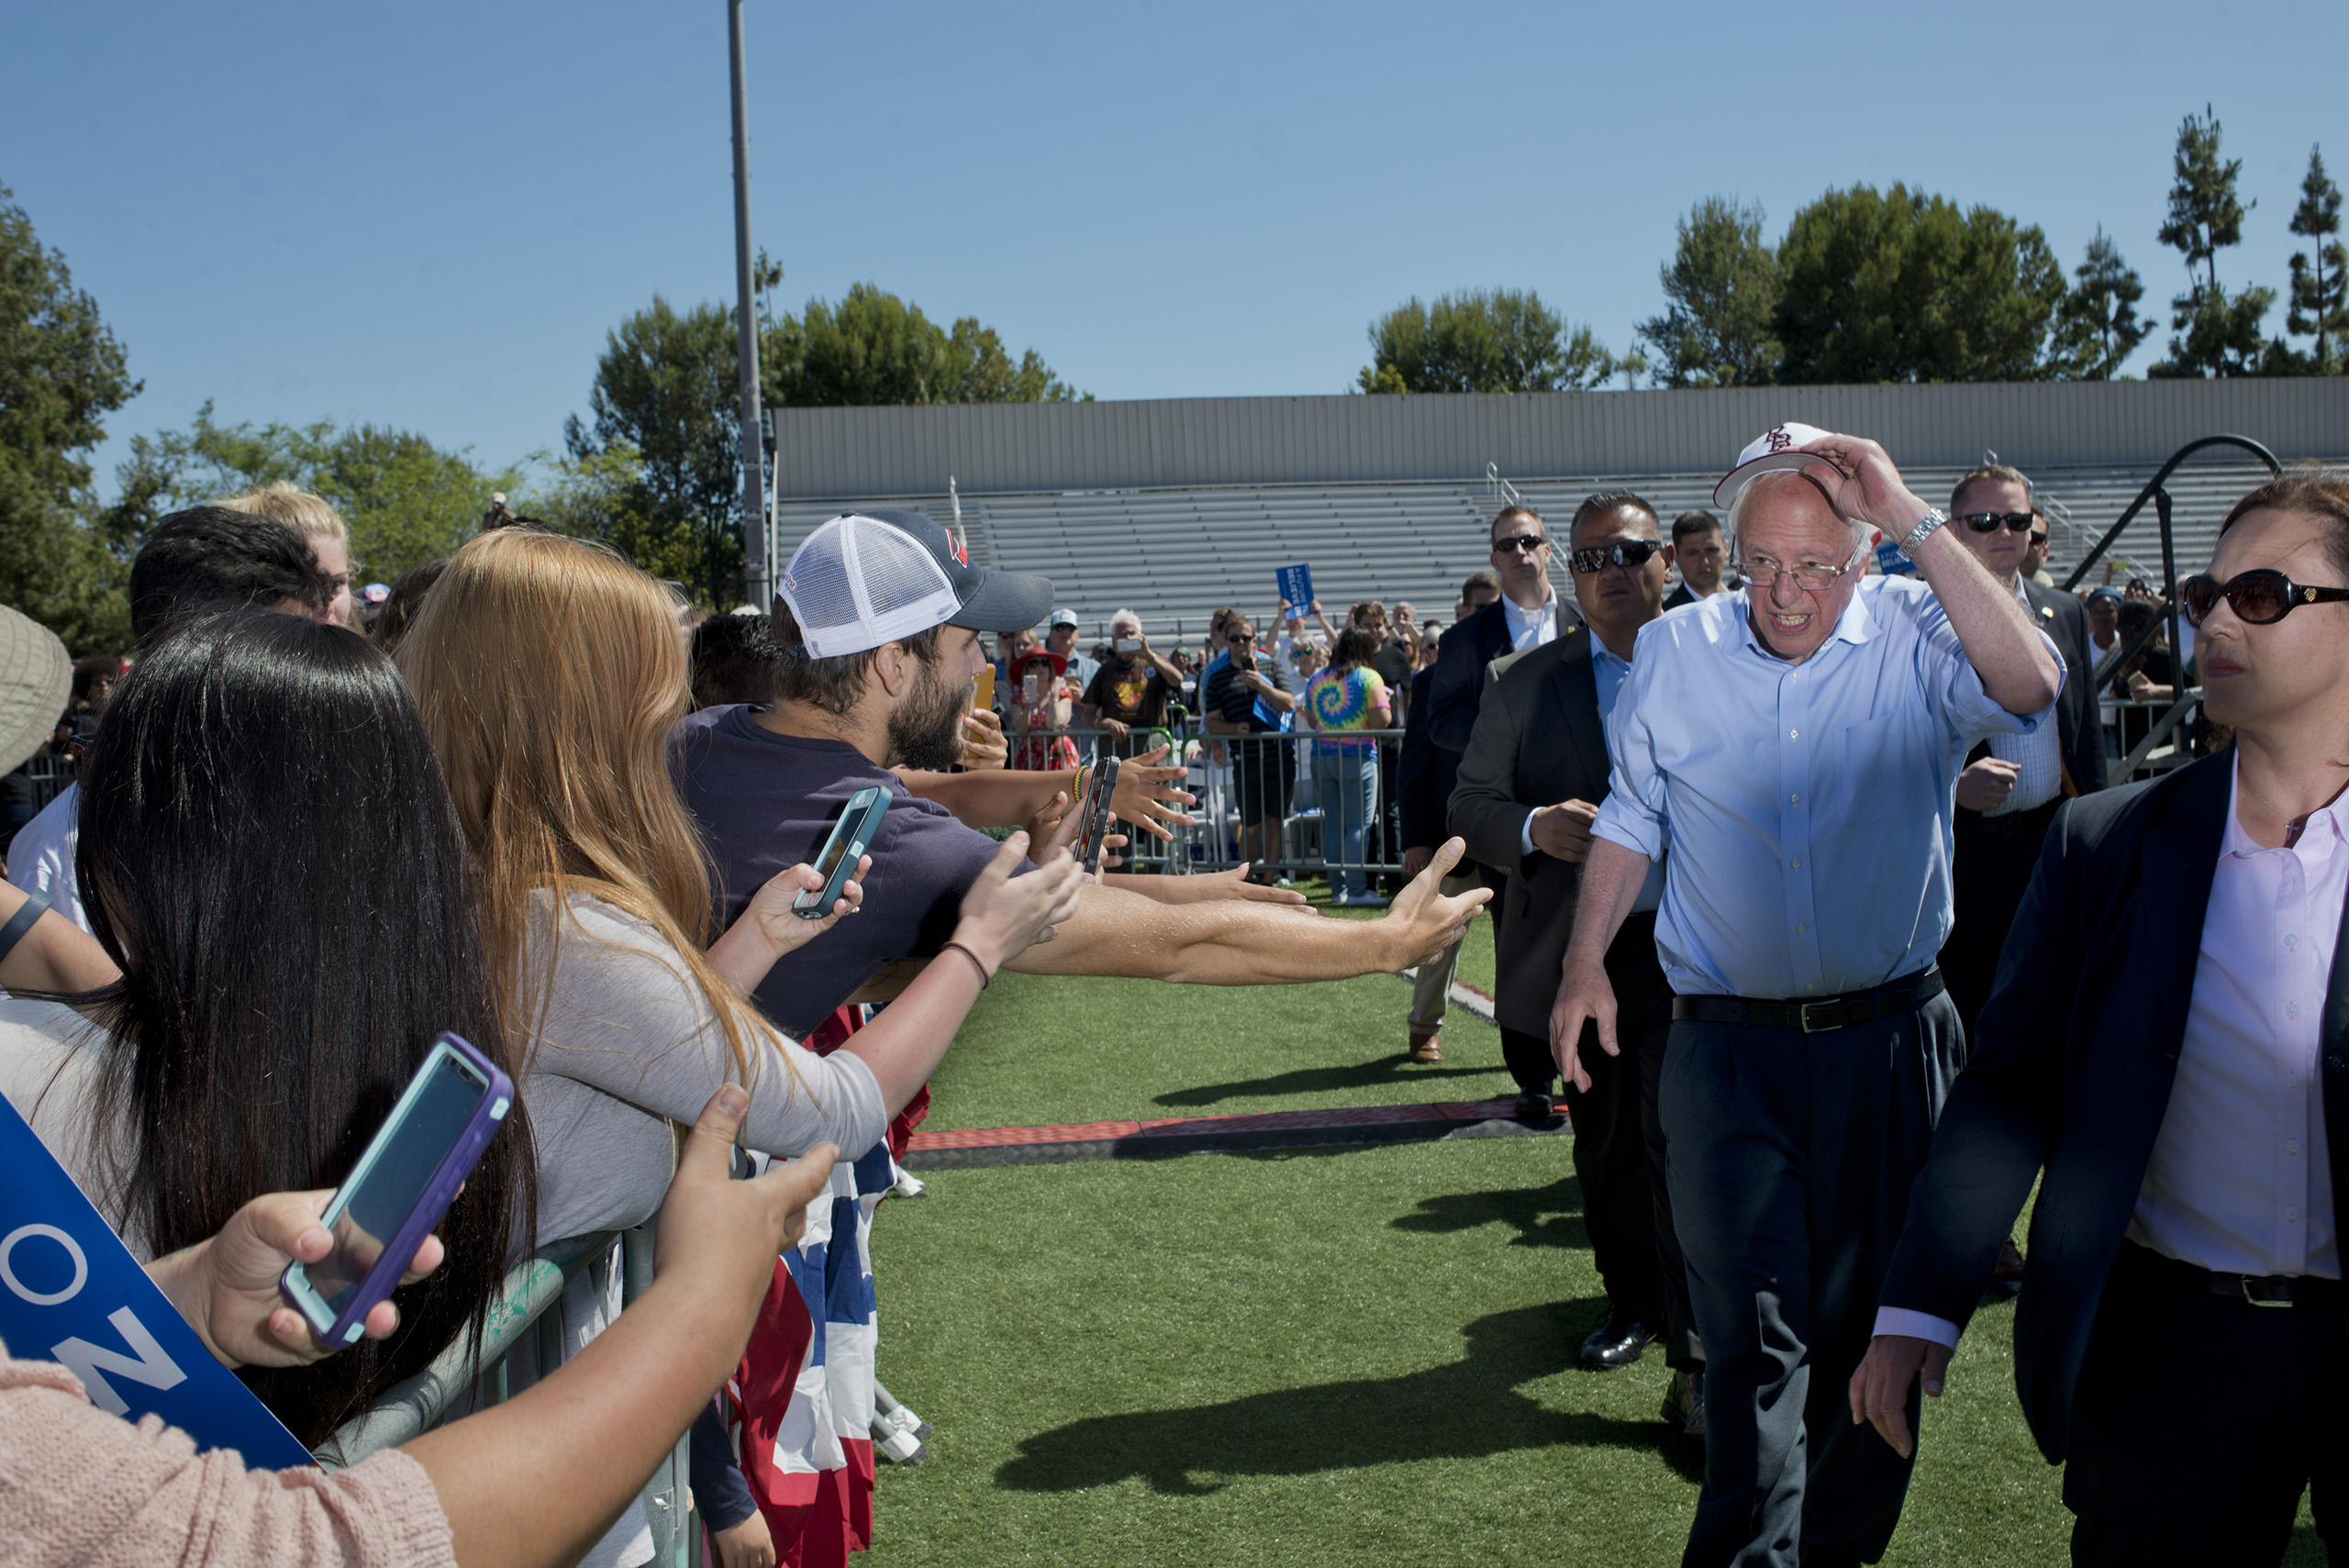 Bernie Sanders greets supporters at a campaign rally at Rancho Buena Vista High School in Vista, Calif., May 22, 2016.